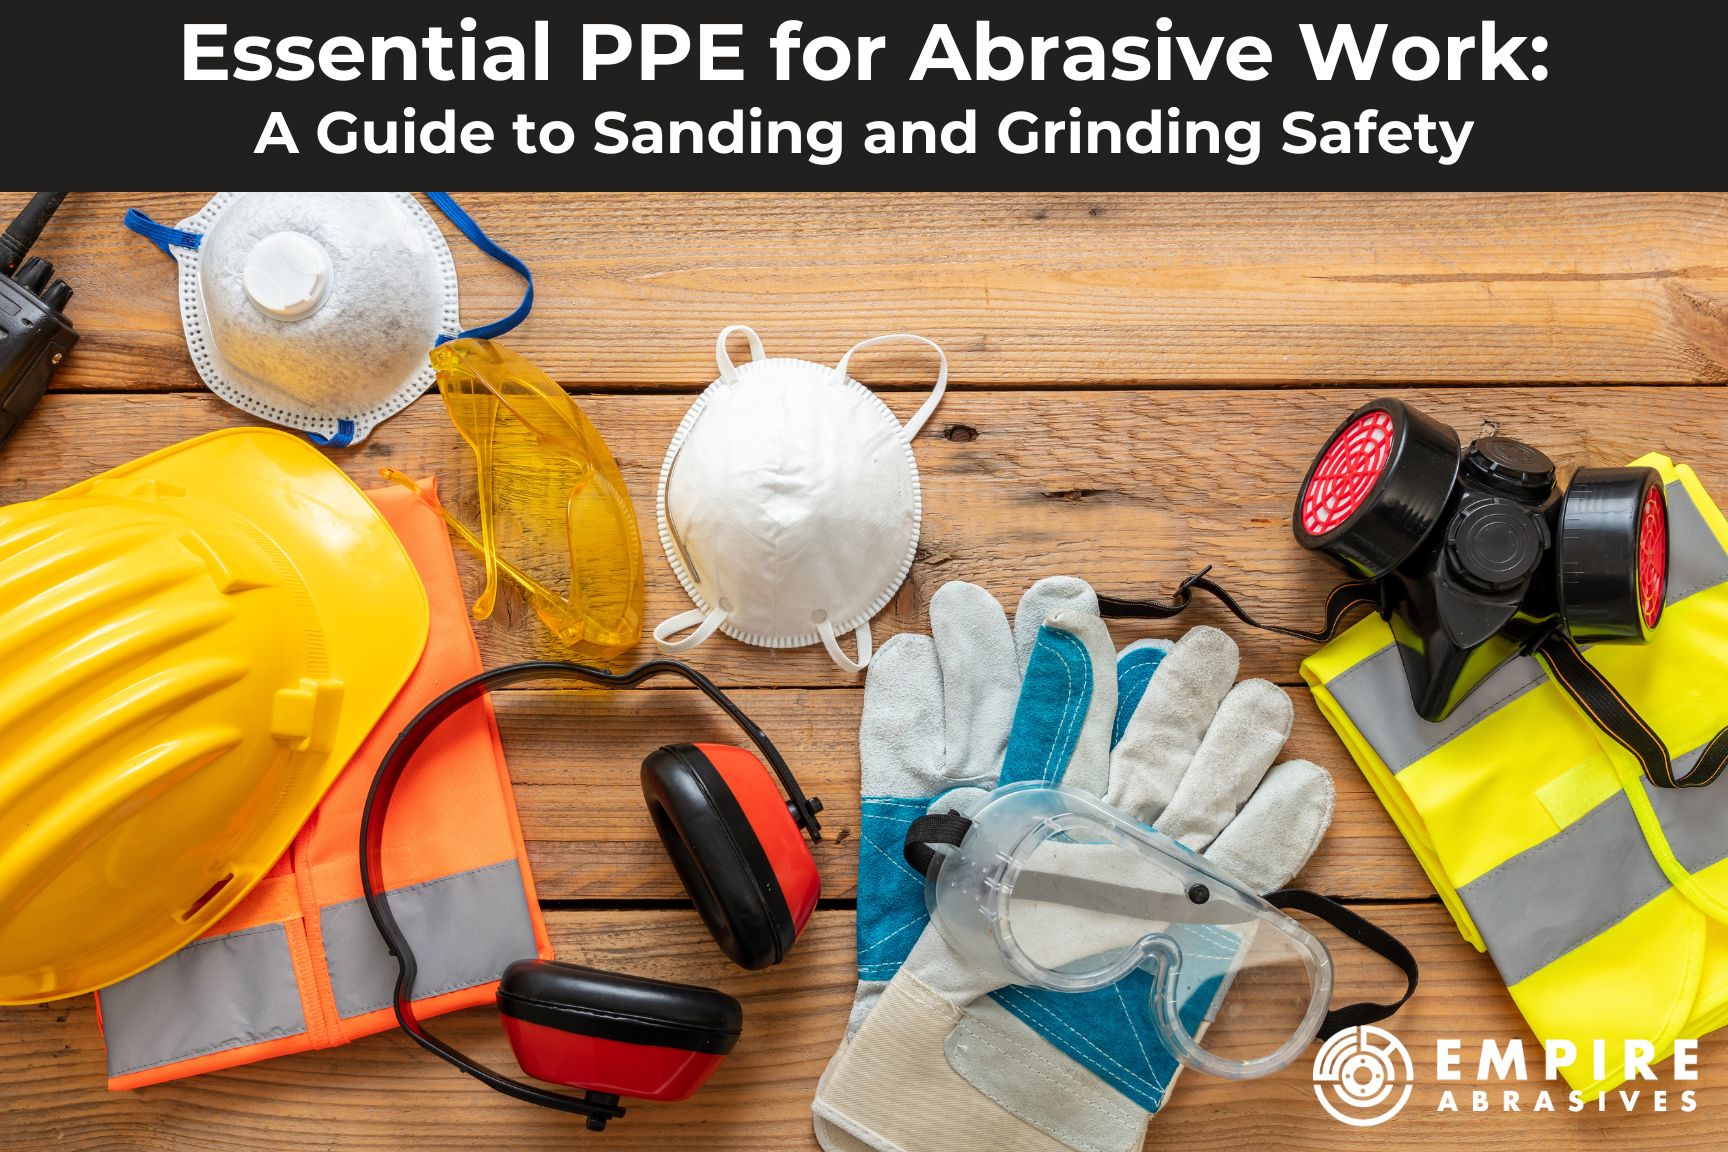 Essential PPE for sanding and grinding work safety